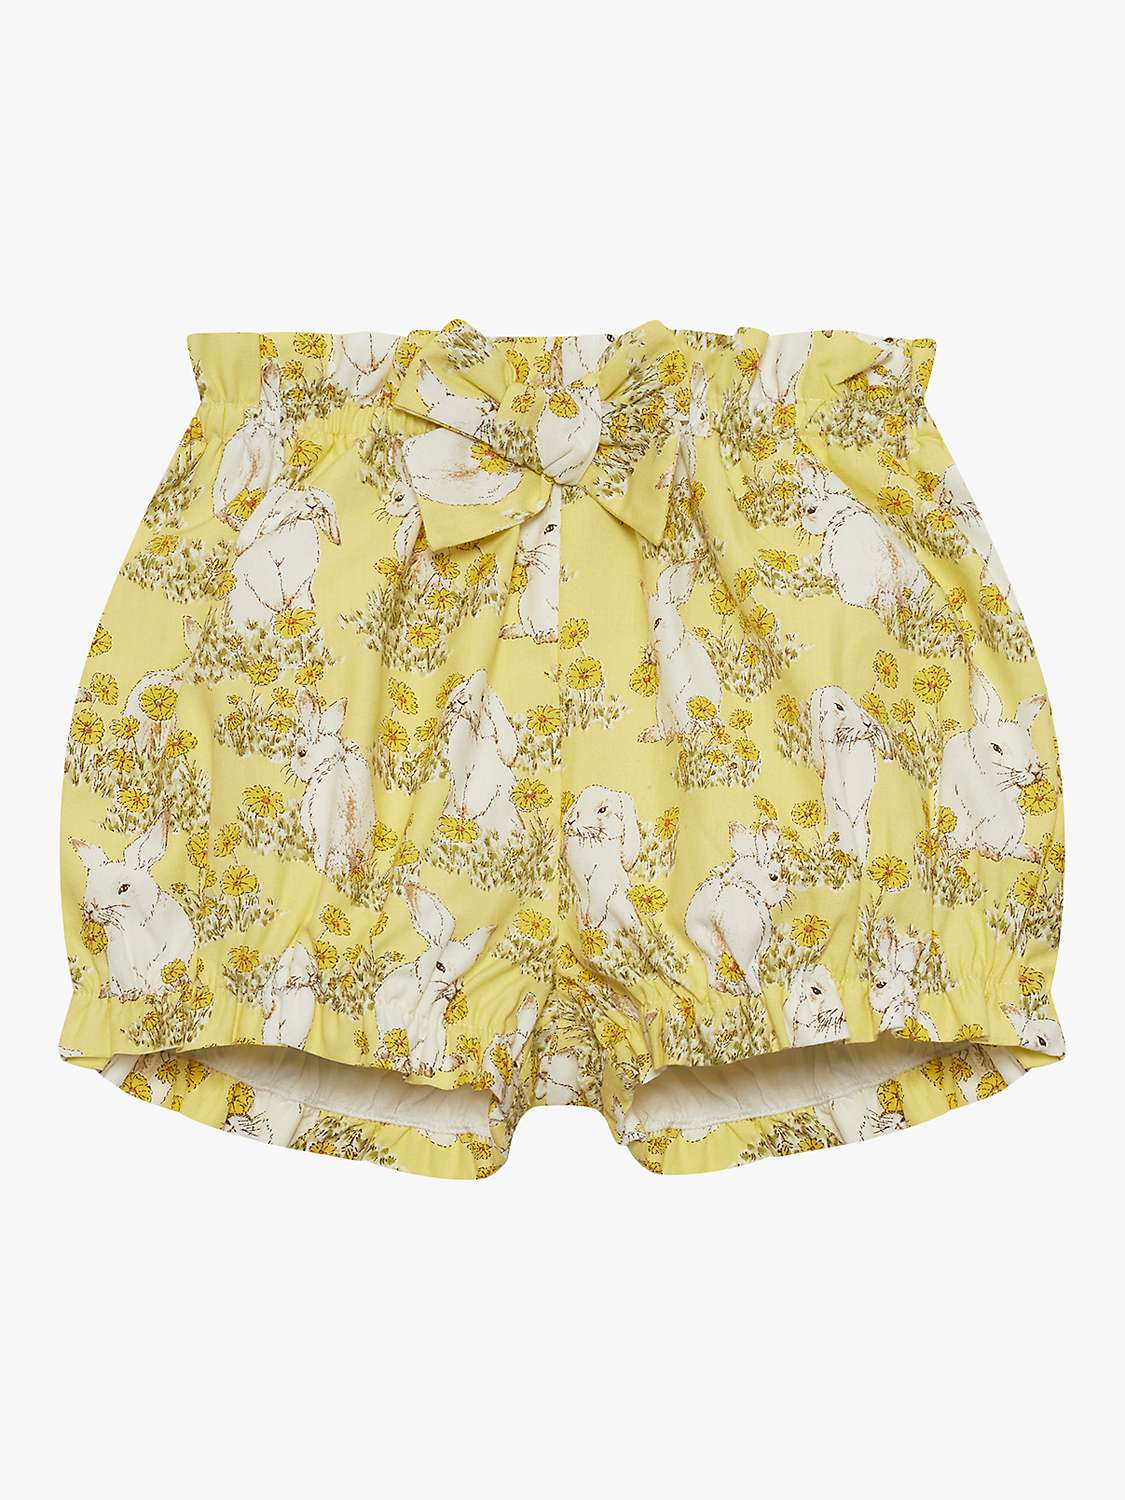 Buy Trotters Baby Bunny Print Cotton Bloomers, Yellow/Multi Online at johnlewis.com